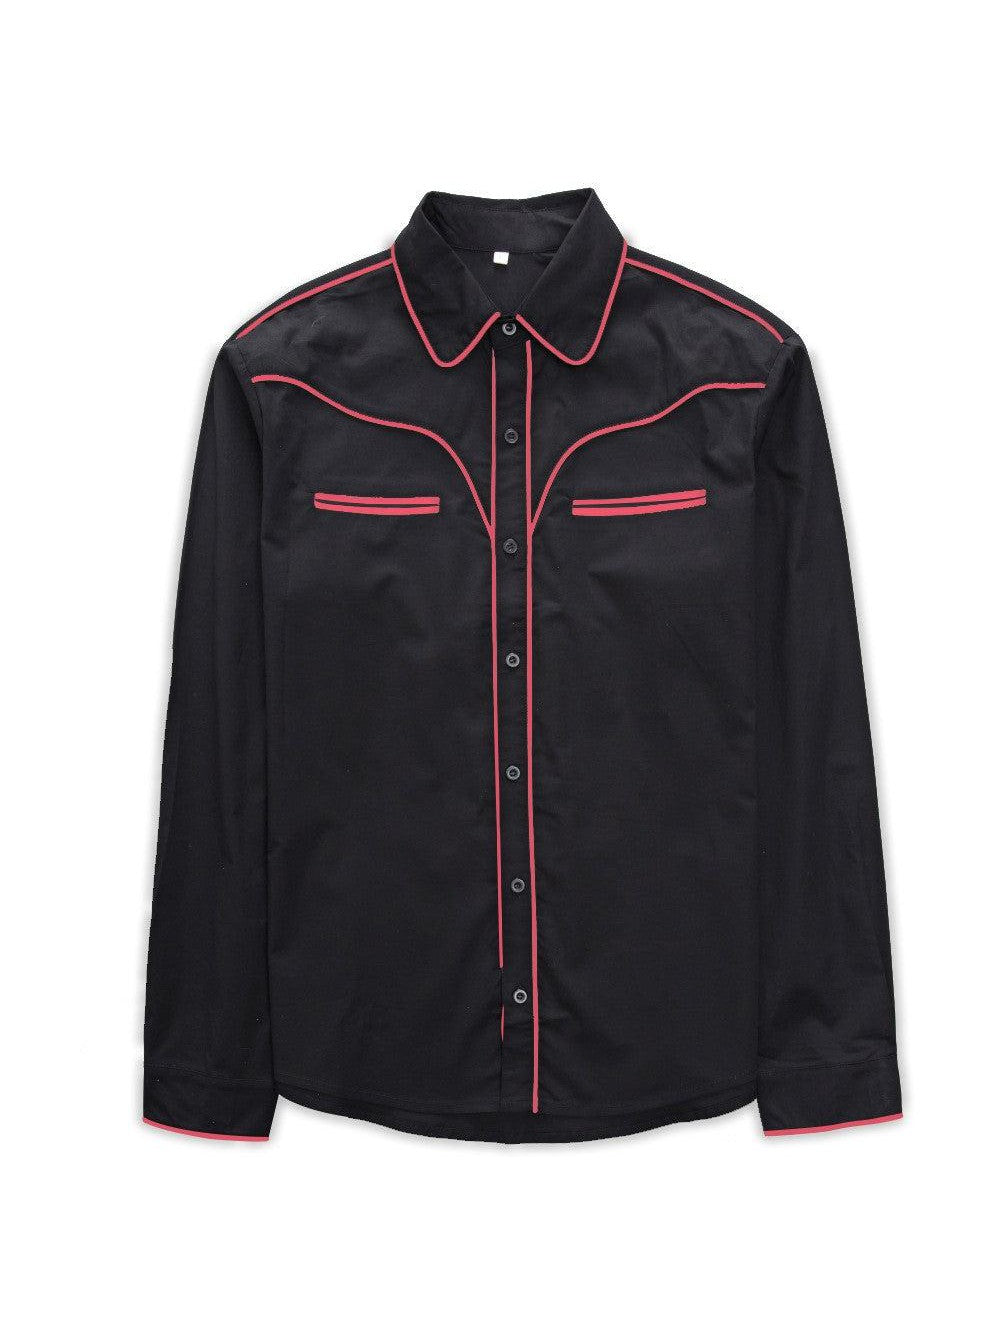 Men's Vintage Style Western Shirt RED